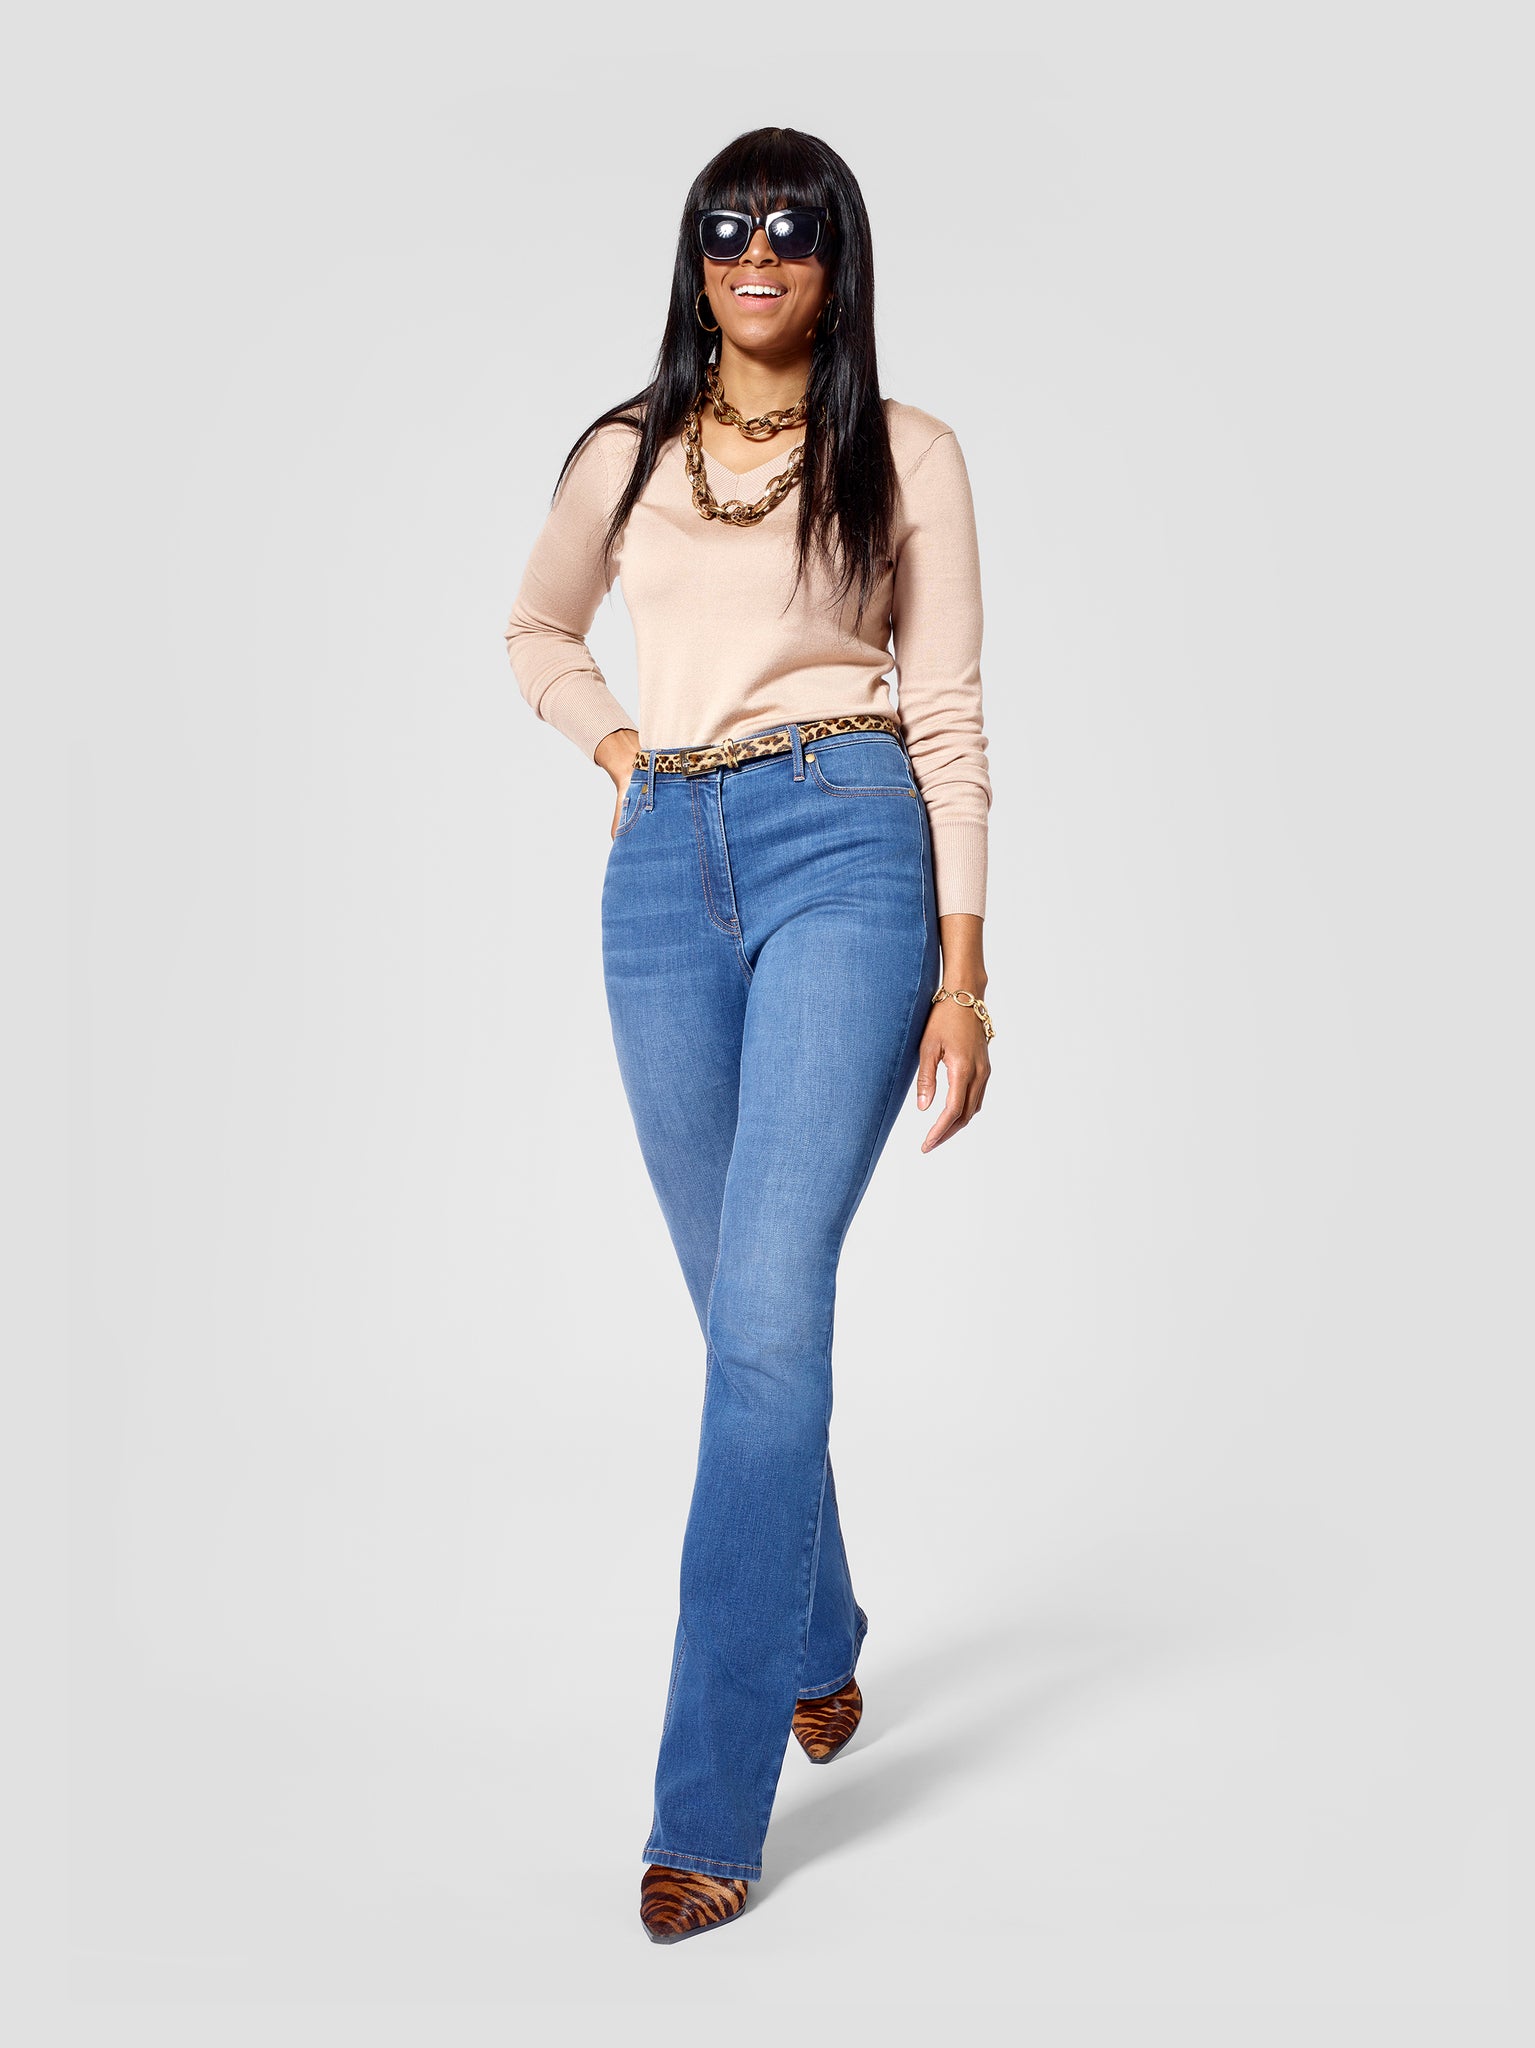 16 Tall Pants & Jeans for Women